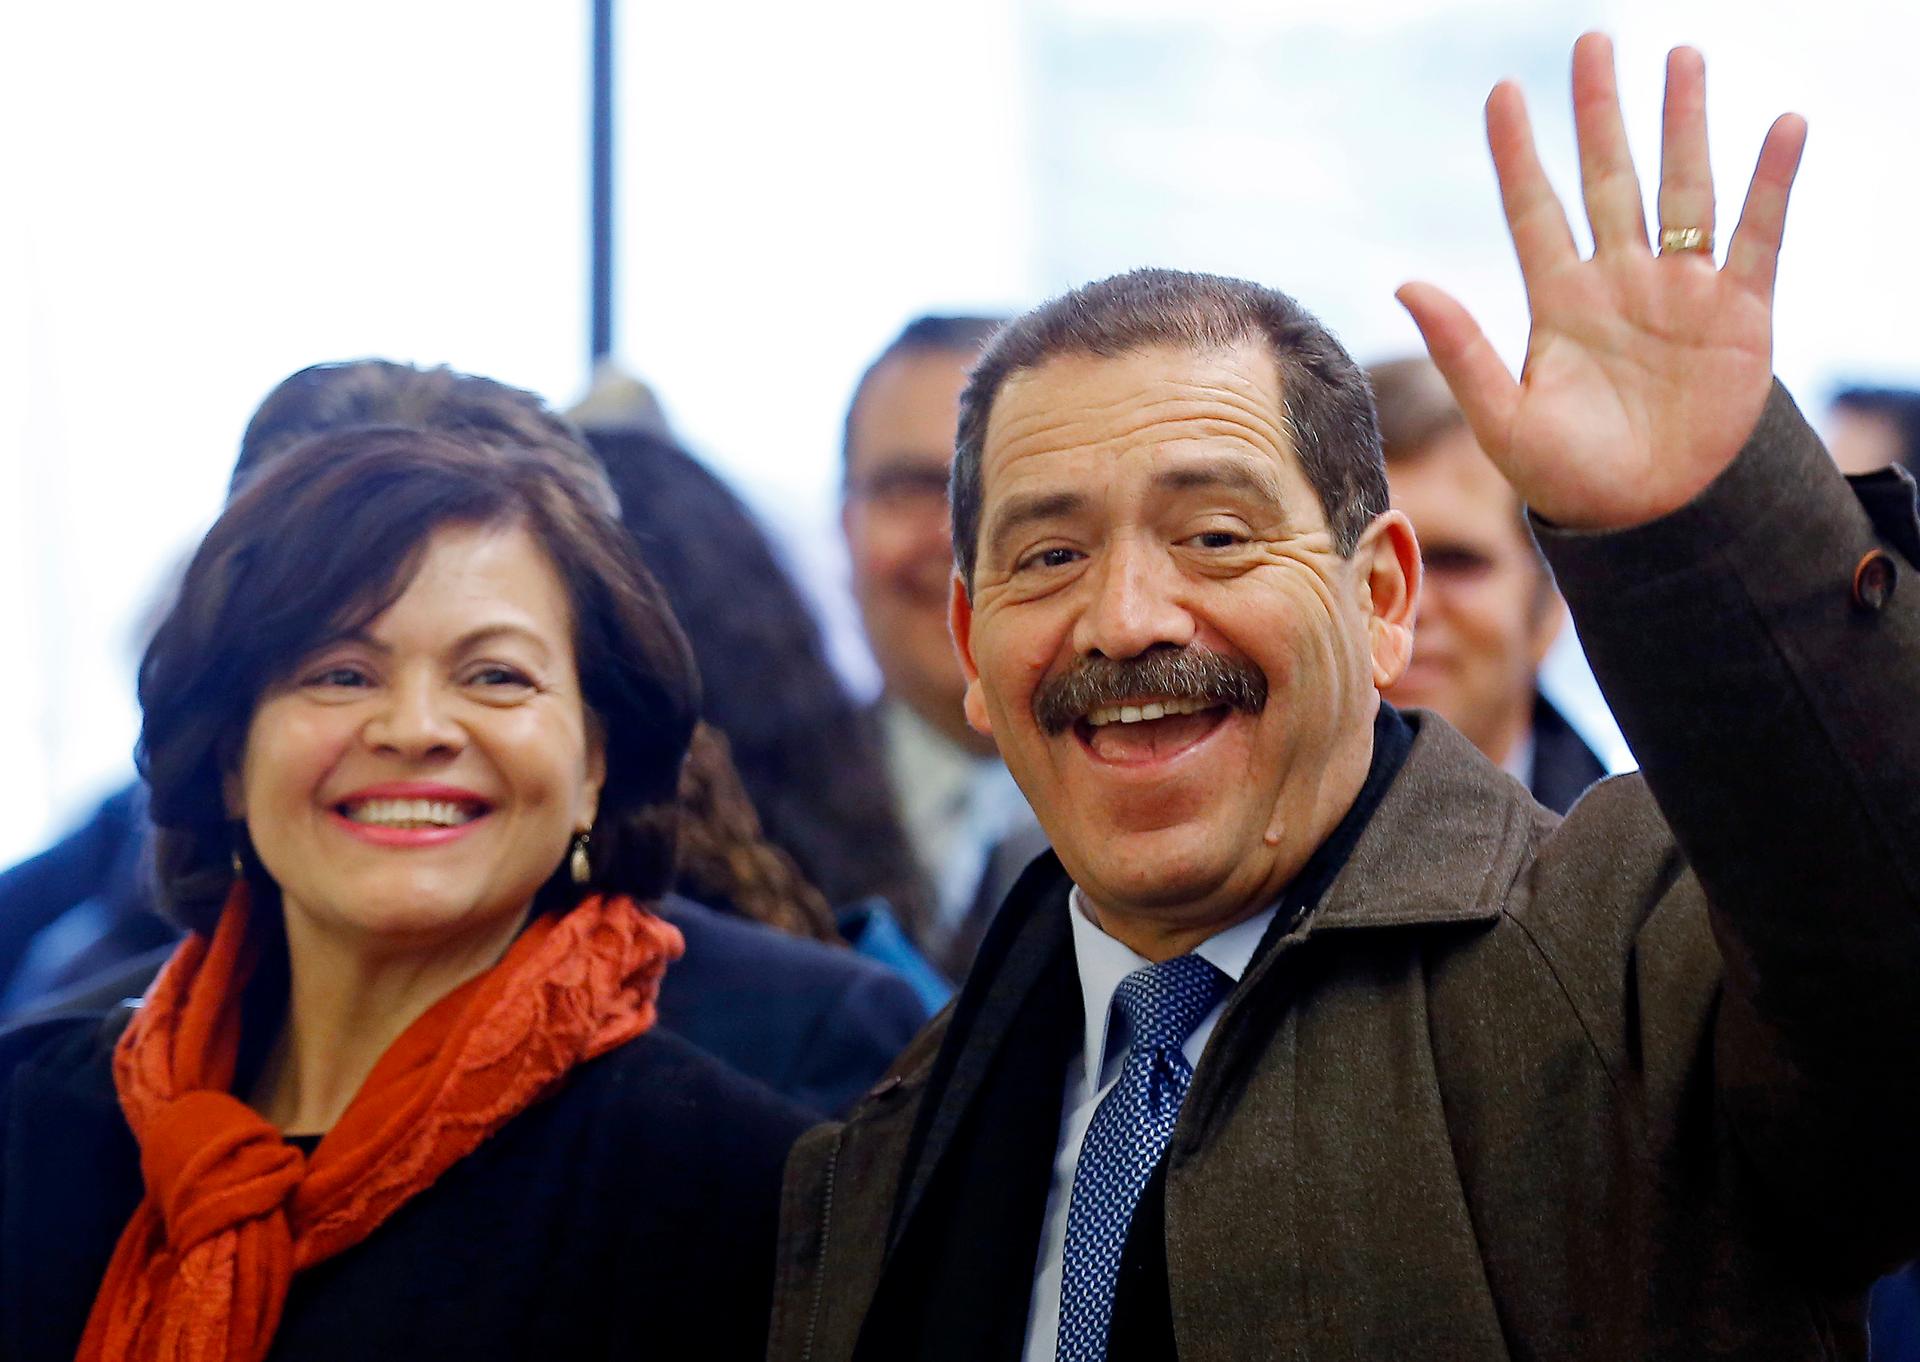 Chicago mayoral candidate Jesus "Chuy" Garcia and his wife, Evelyn, arrive at a restaurant for lunch on February 24, 2015, the day of the Chicago Democratic primary.